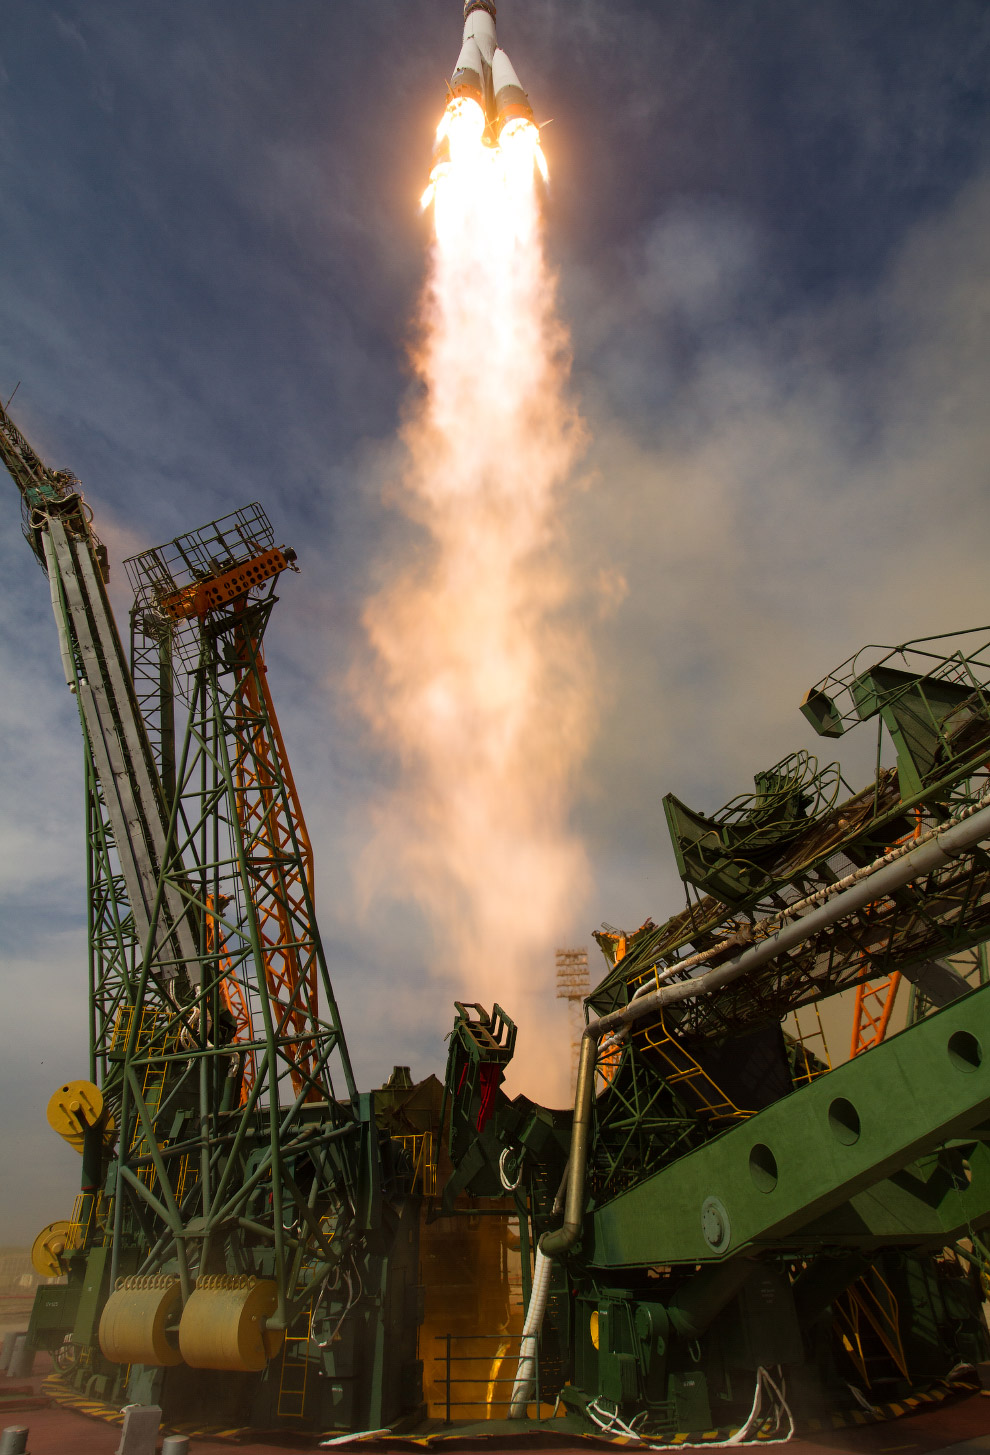 Expedition 56 Launch